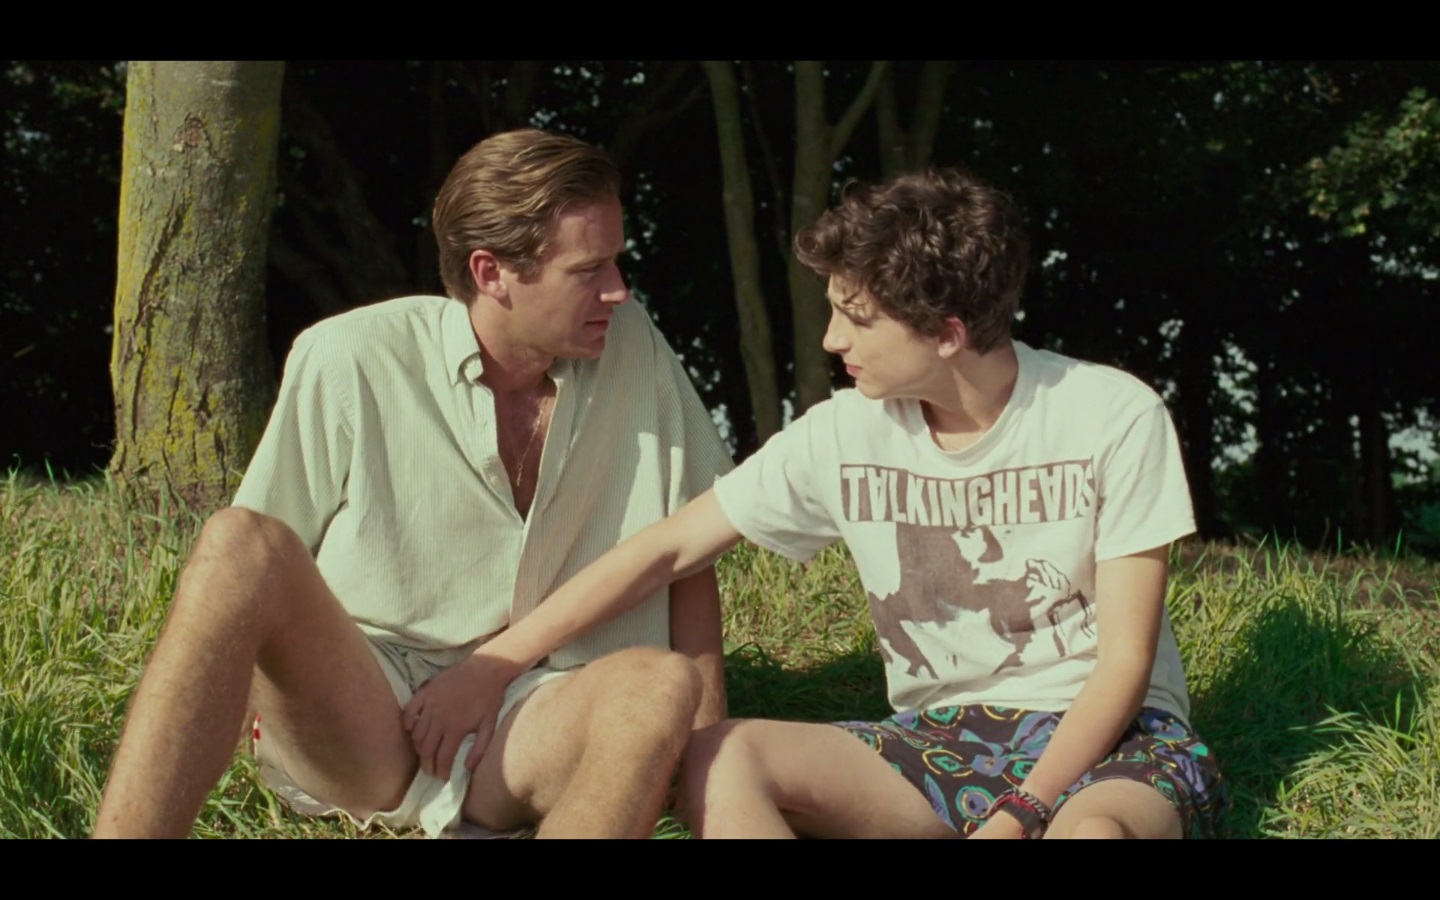 Gay Celebrity Scene From Armie Hammer